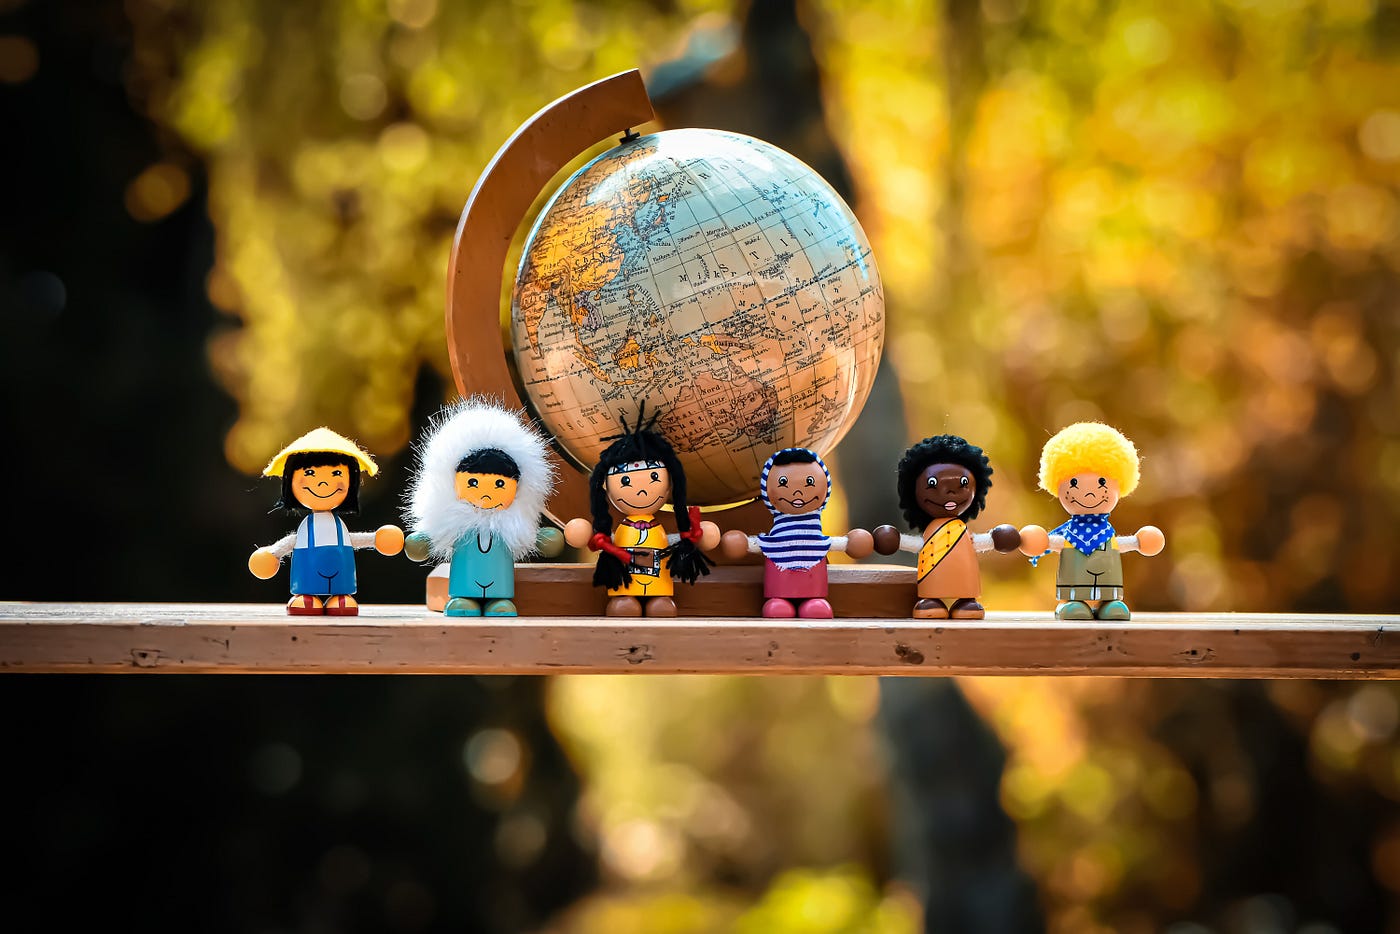 all different ethnicities in lego form surrounding a desktop globe.